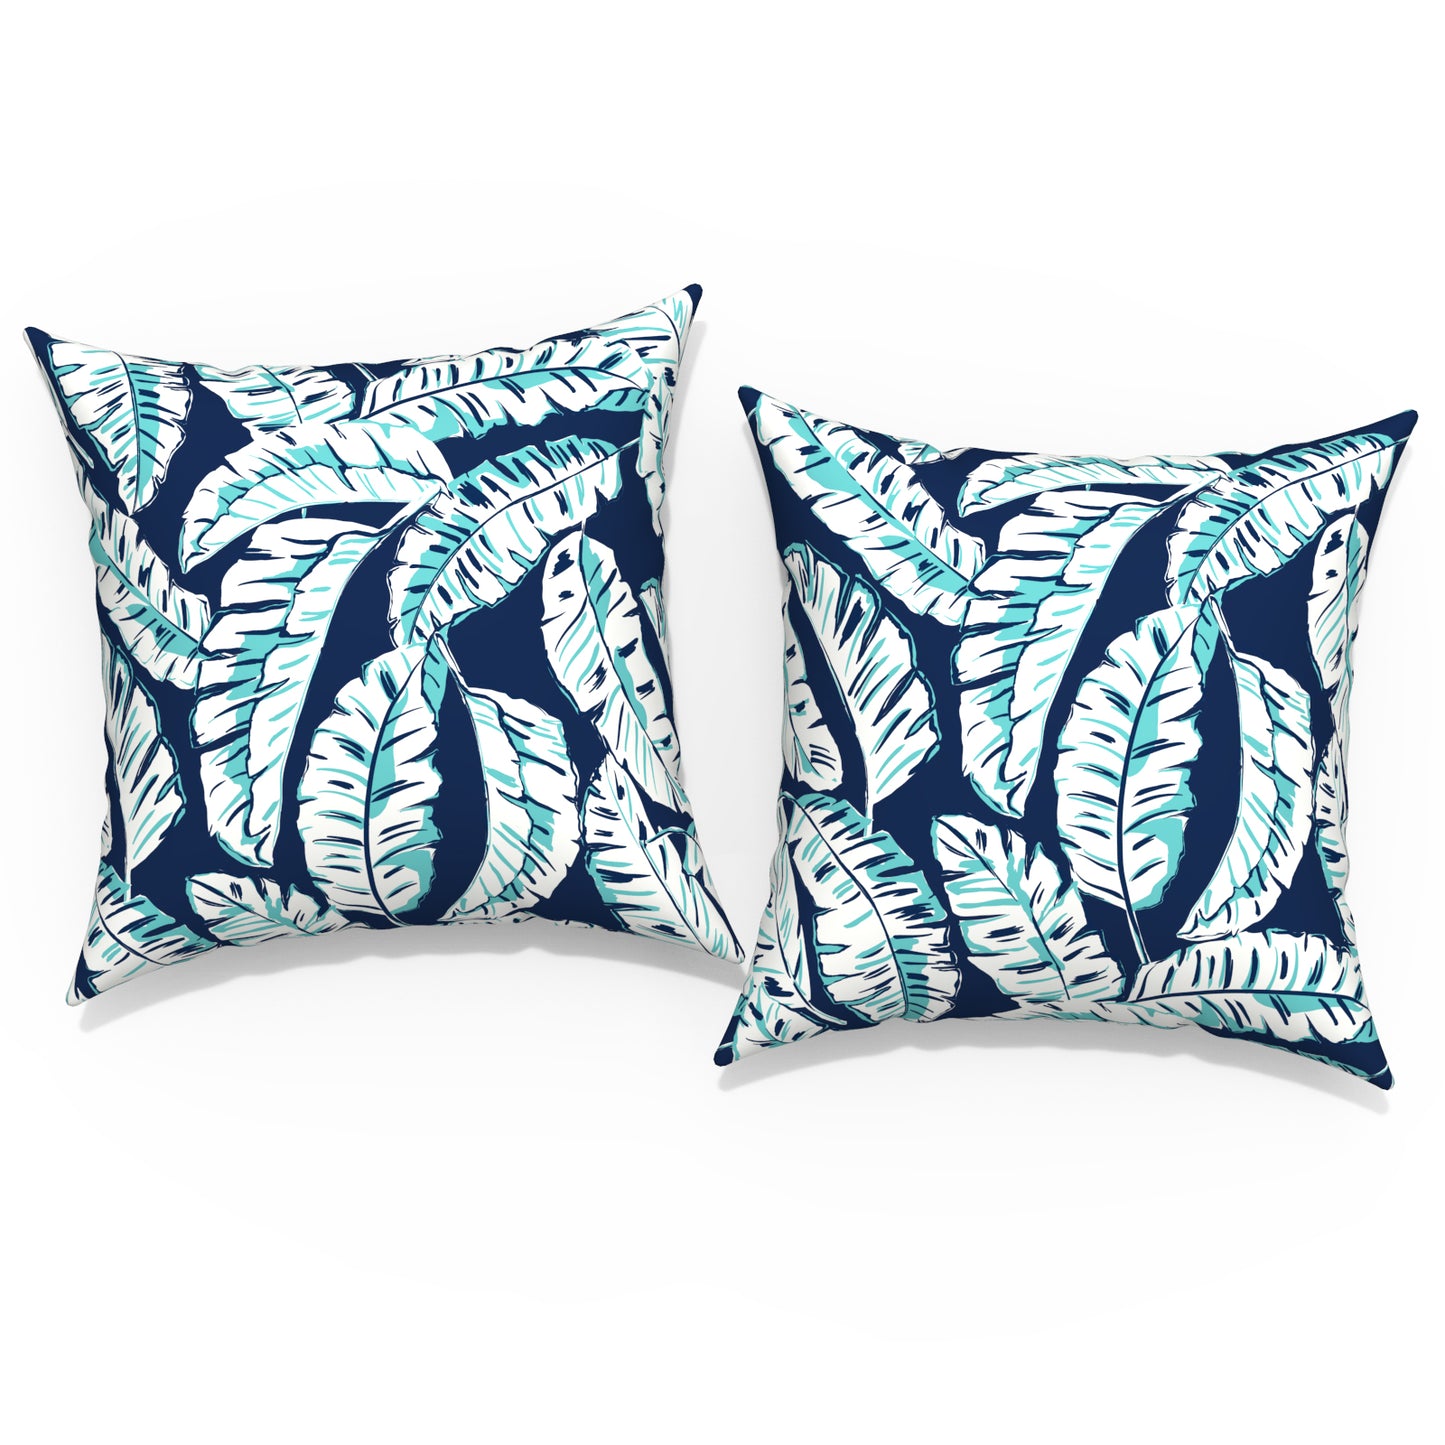 Melody Elephant Pack of 2 Patio Throw Pillow Covers ONLY, Water Repellent Cushion Cases 20x20 Inch, Square Pillowcases for Outdoor Couch Decoration, Baltic Palms White